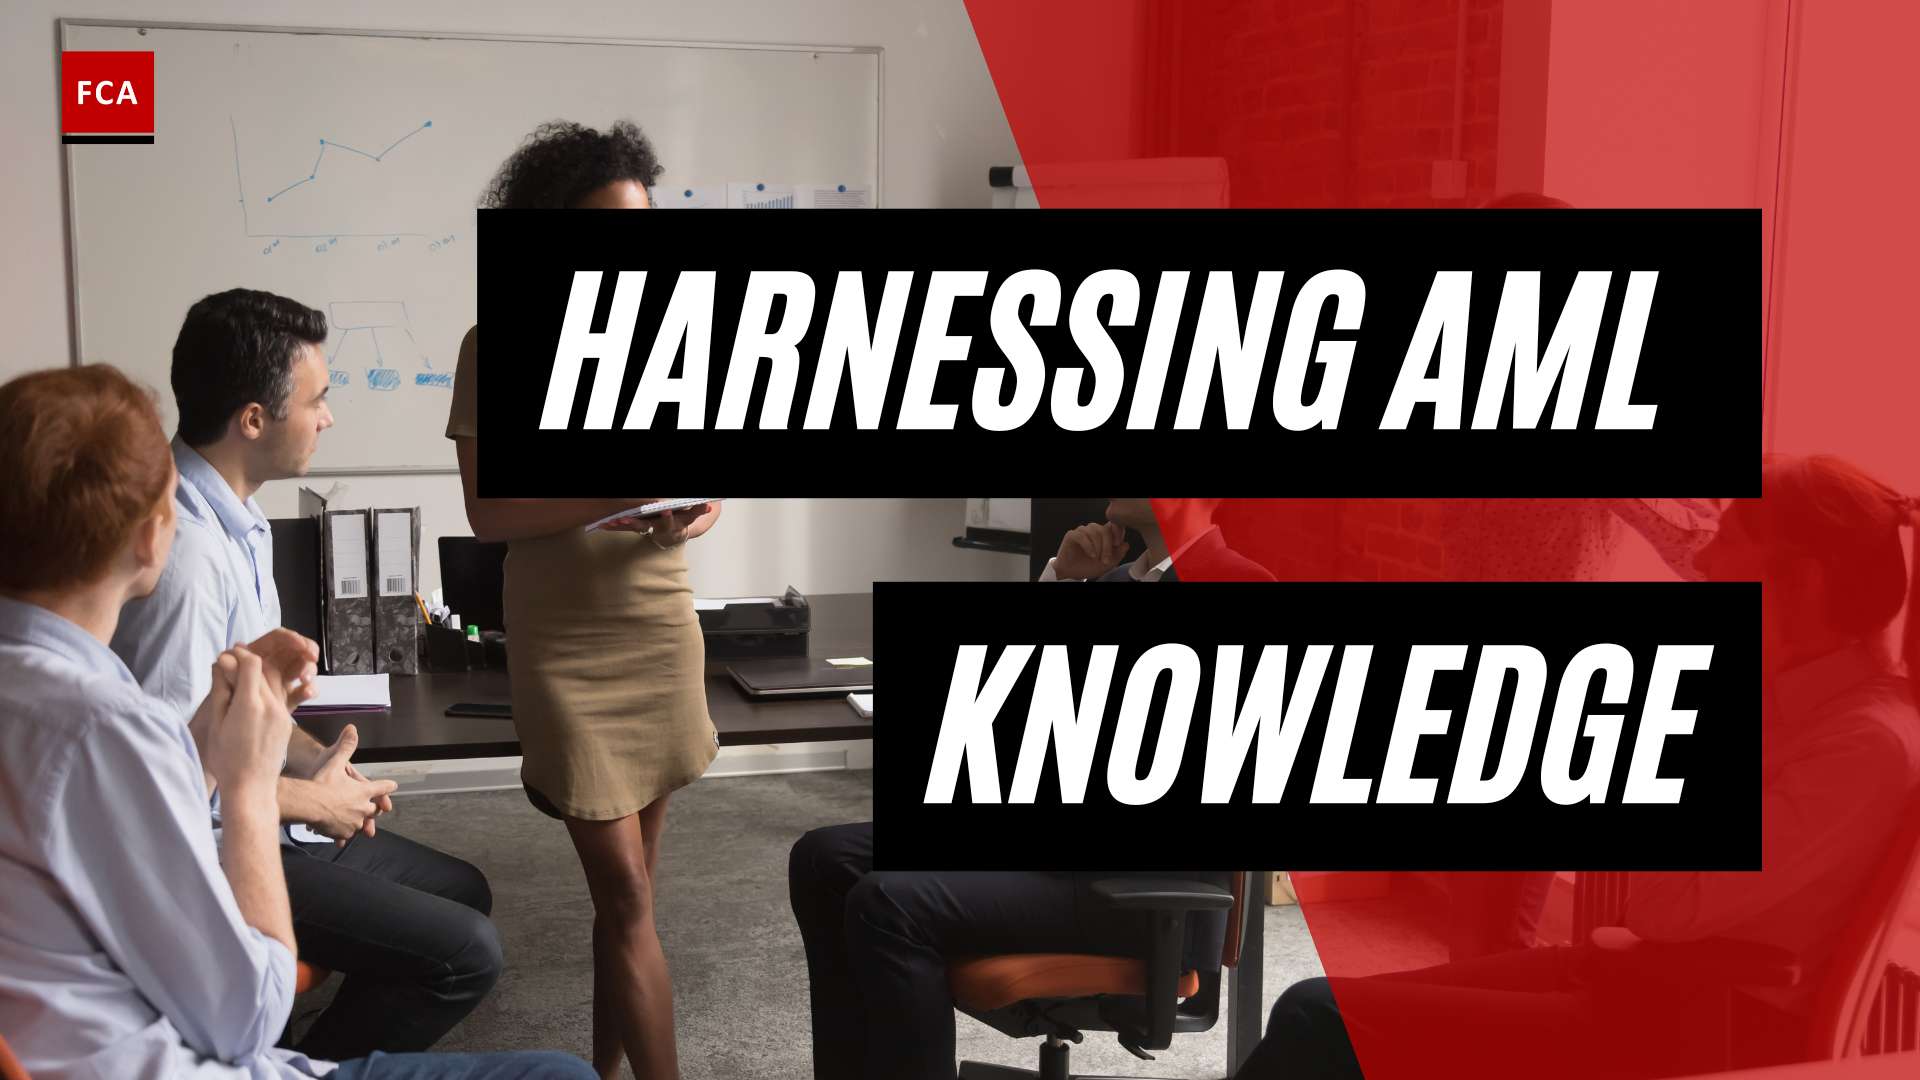 Harnessing Knowledge: Meeting The Aml Training Requirements